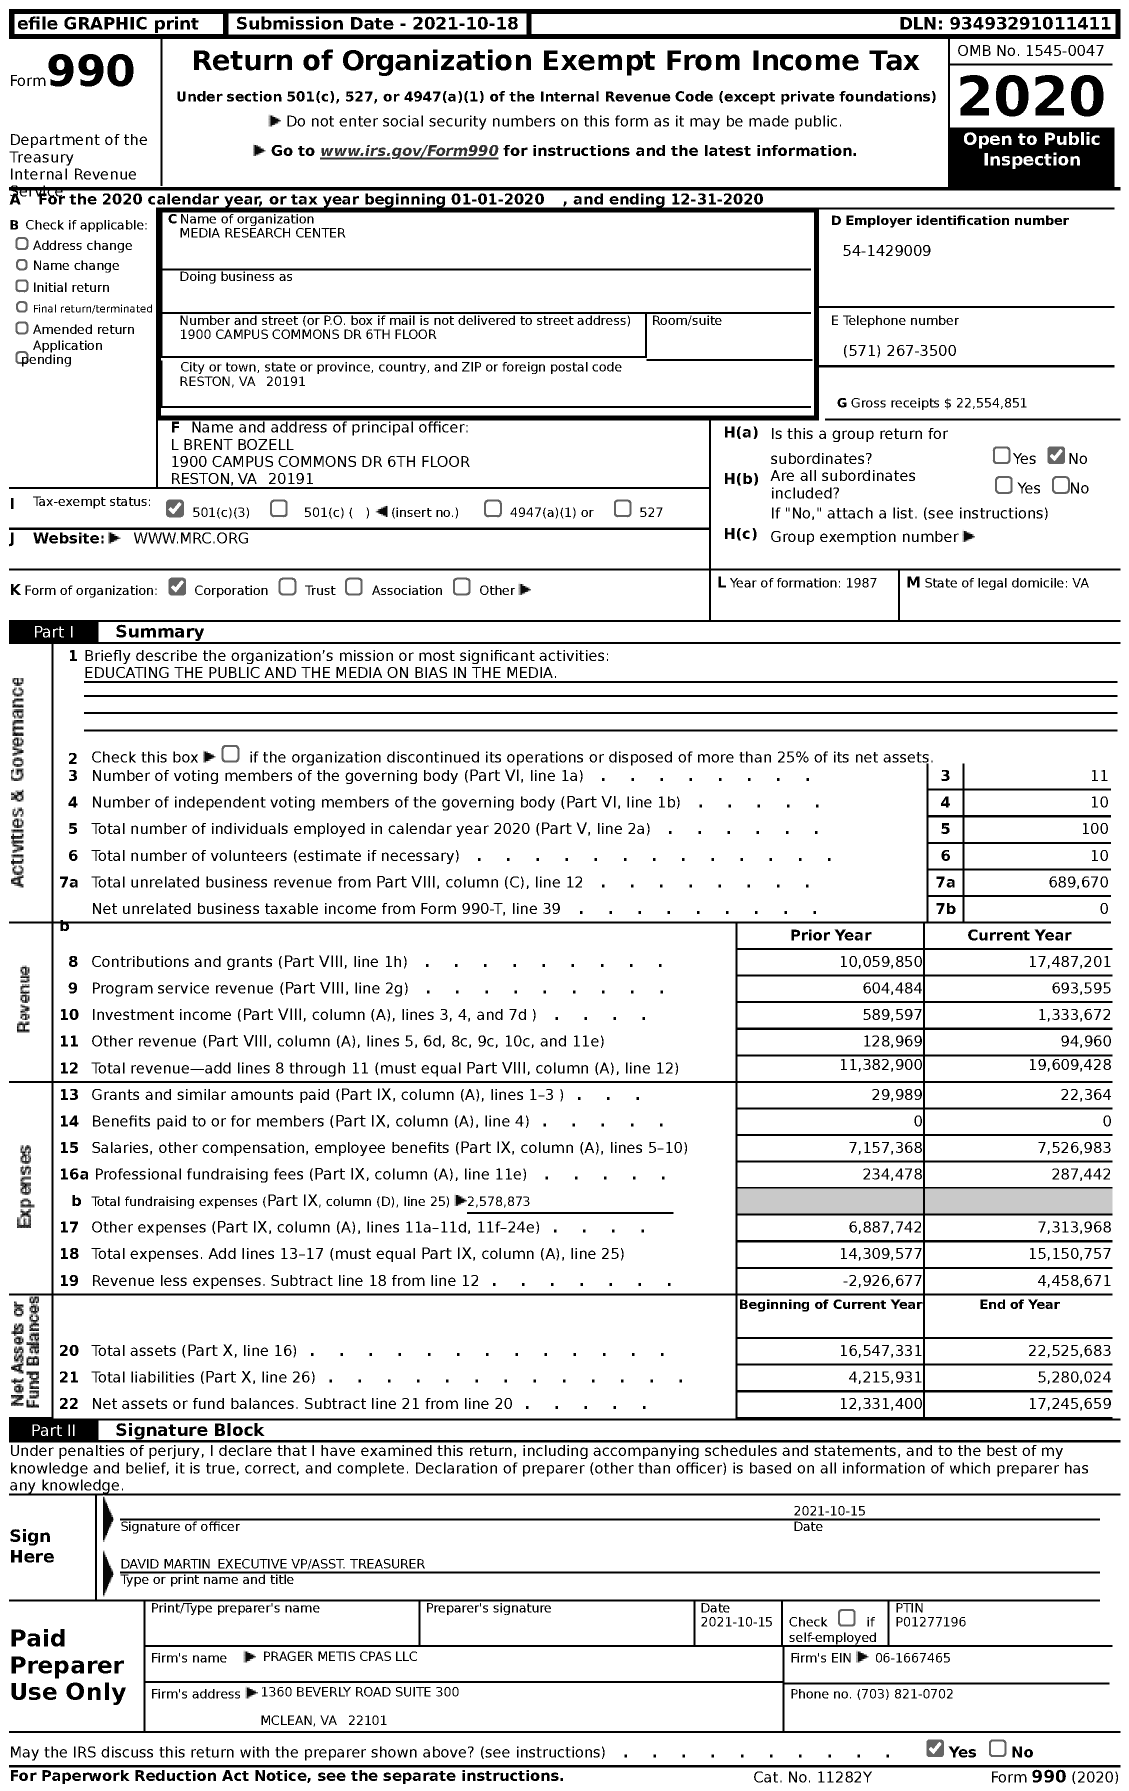 Image of first page of 2020 Form 990 for Media Research Center (MRC)